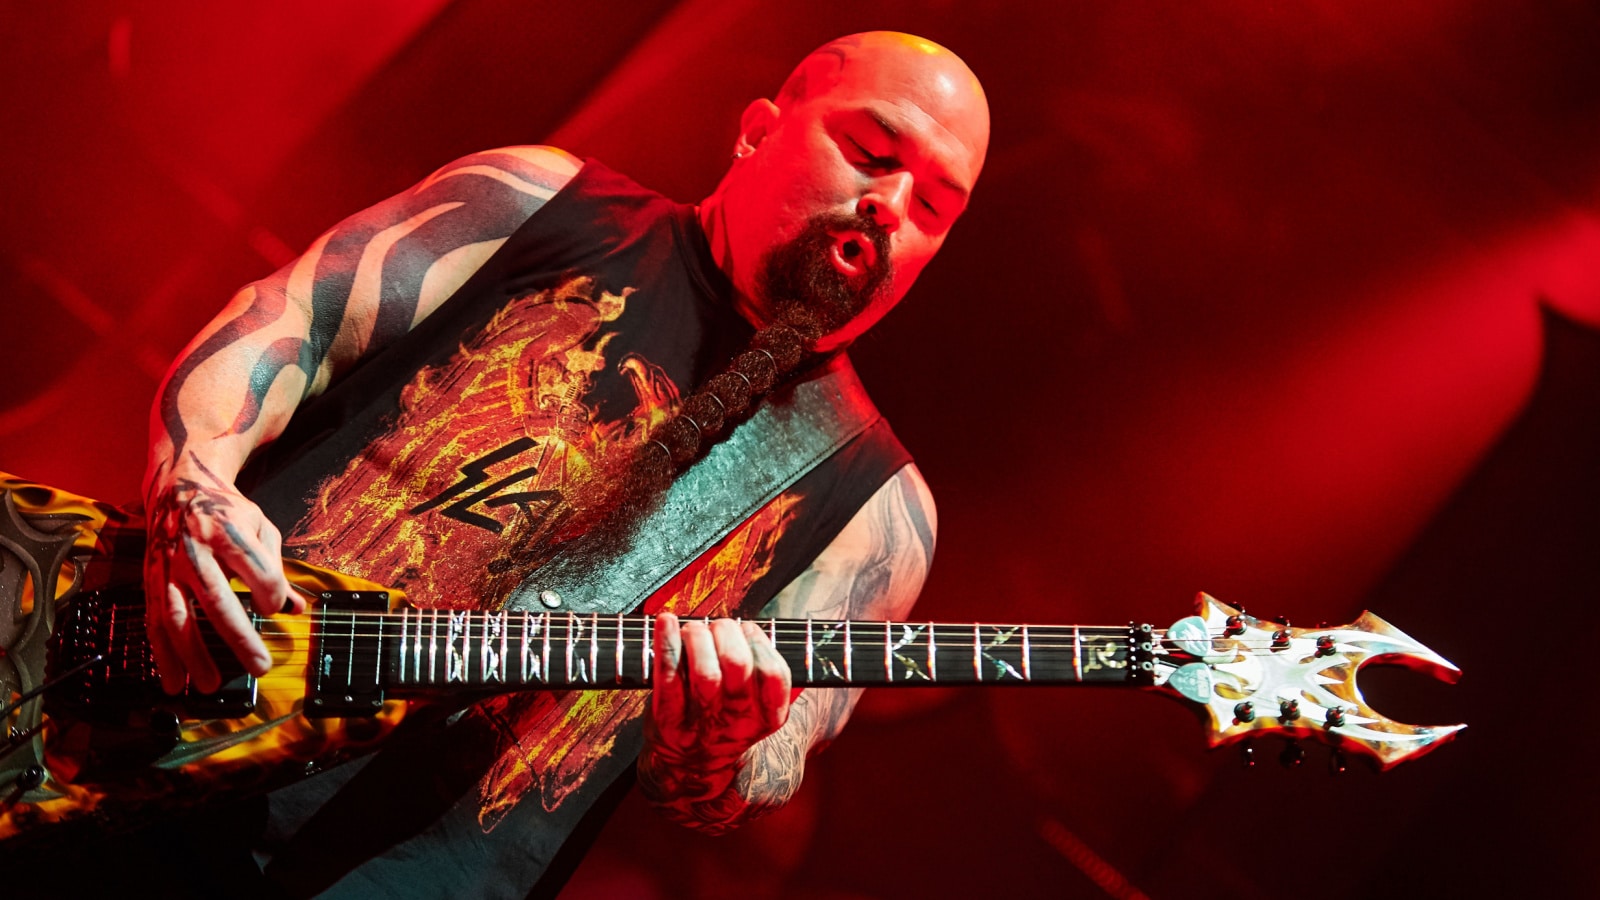 Guitarist Kerry King of Slayer performs live on stage during a Repentless concert at "Stadium-Live" on December 9, 2015 in Moscow, Russia.